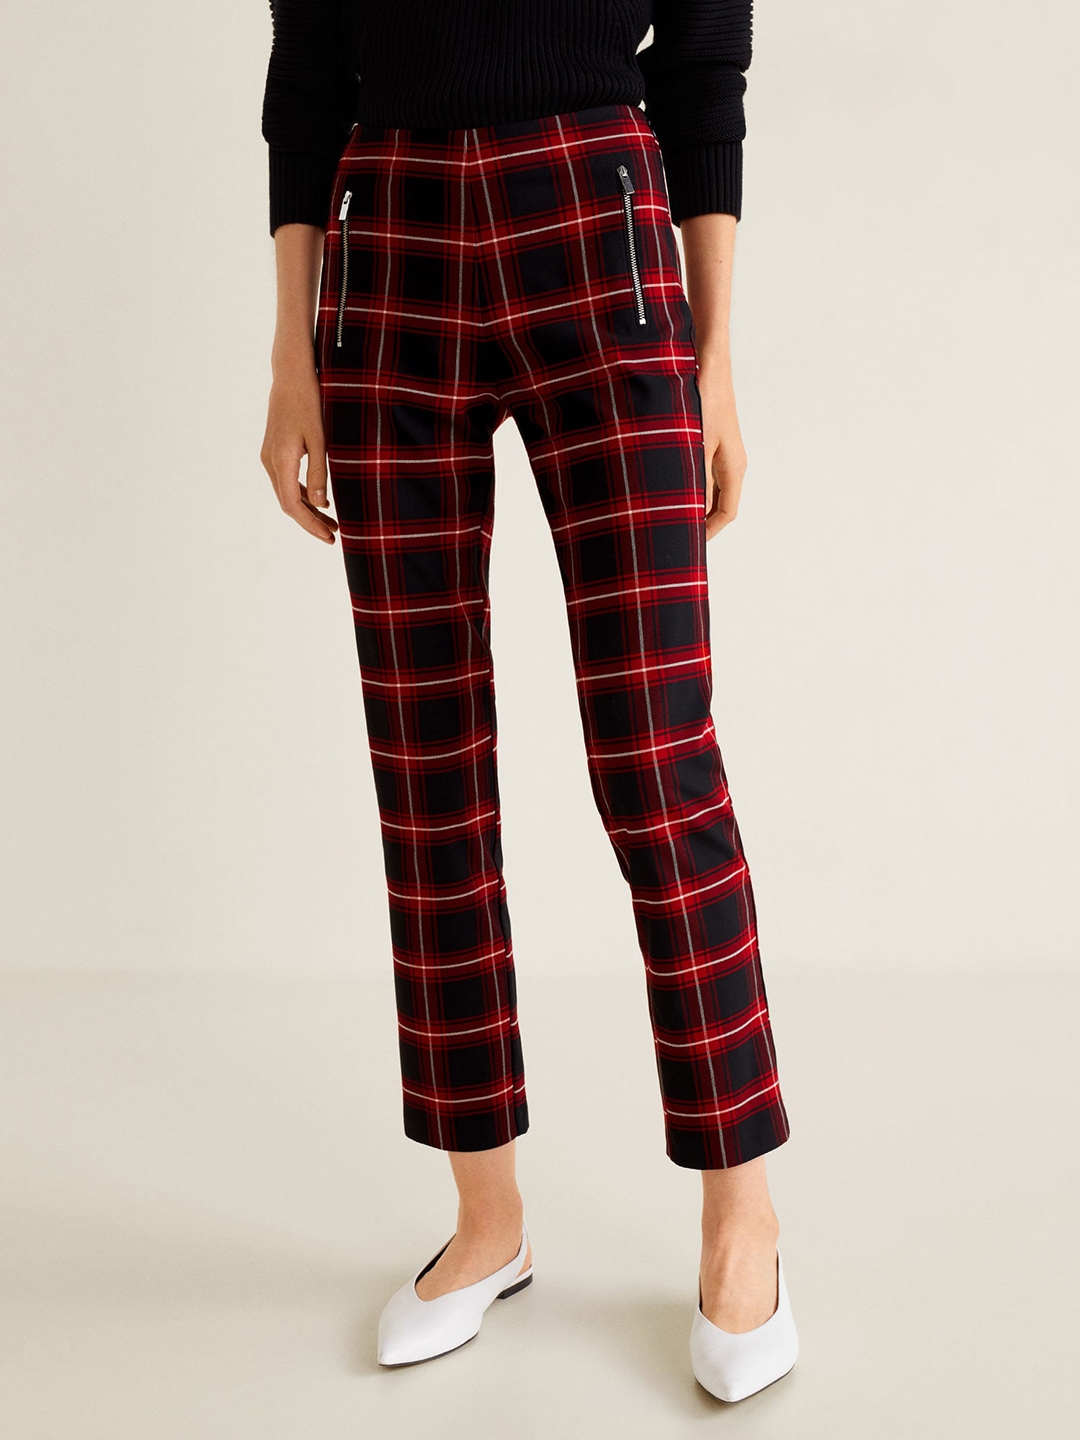 Warehouse peg trousers in red tartan check  ASOS  Checked trousers  outfit Plaid outfits Red plaid pants